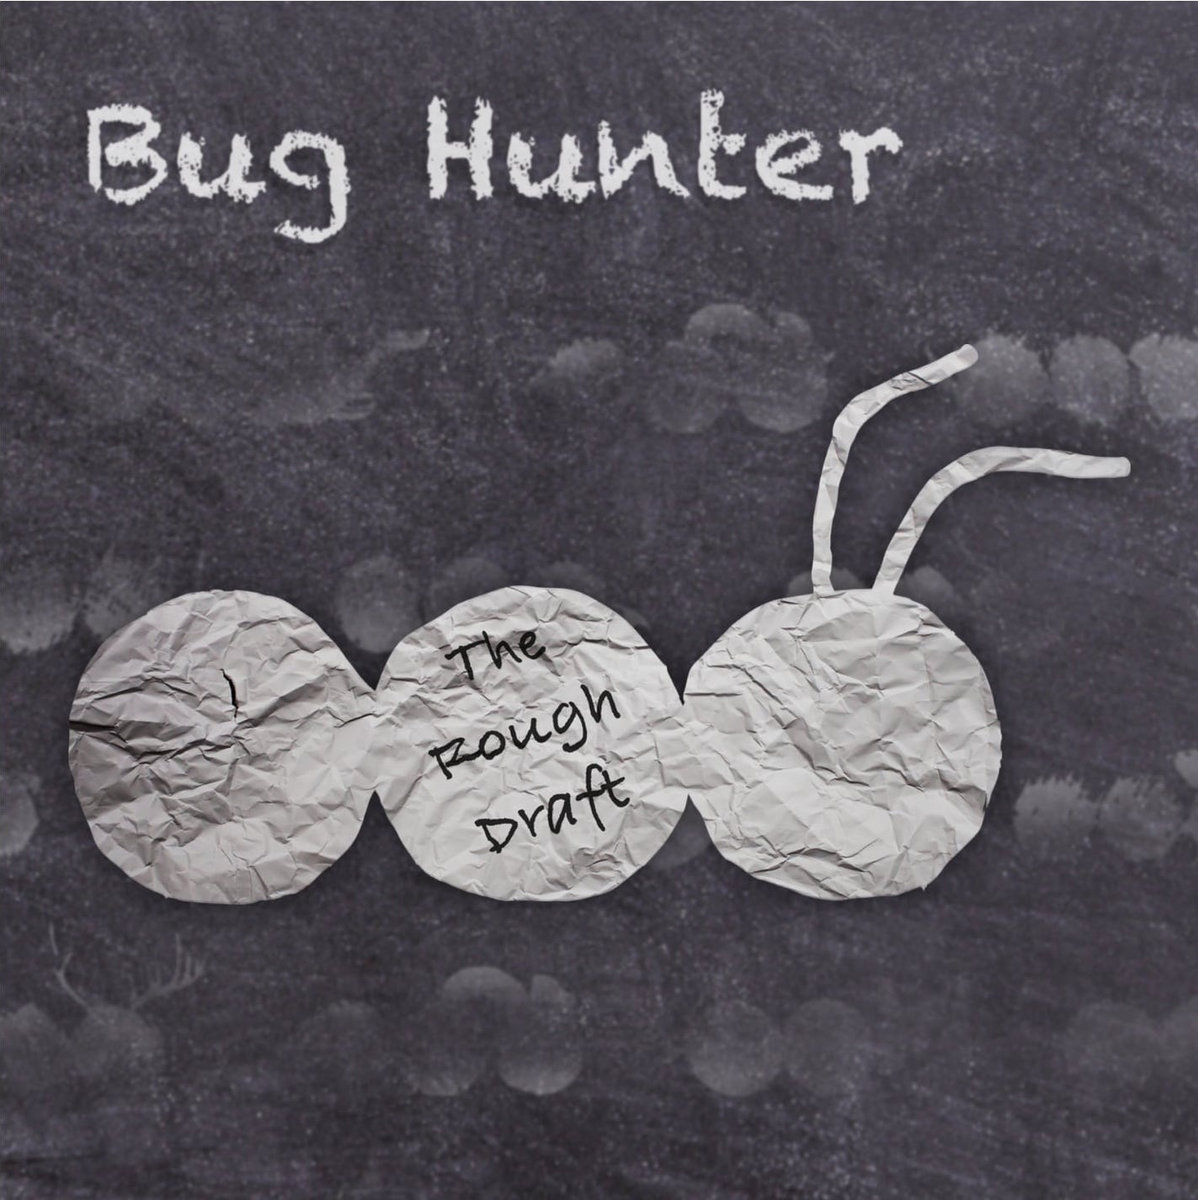 The album cover for Bug Hunter’s “The Rough Draft”. The album is filled with messages and situations that are filled with relatability. Graphic by Cody ‘Bug’ Hunter

